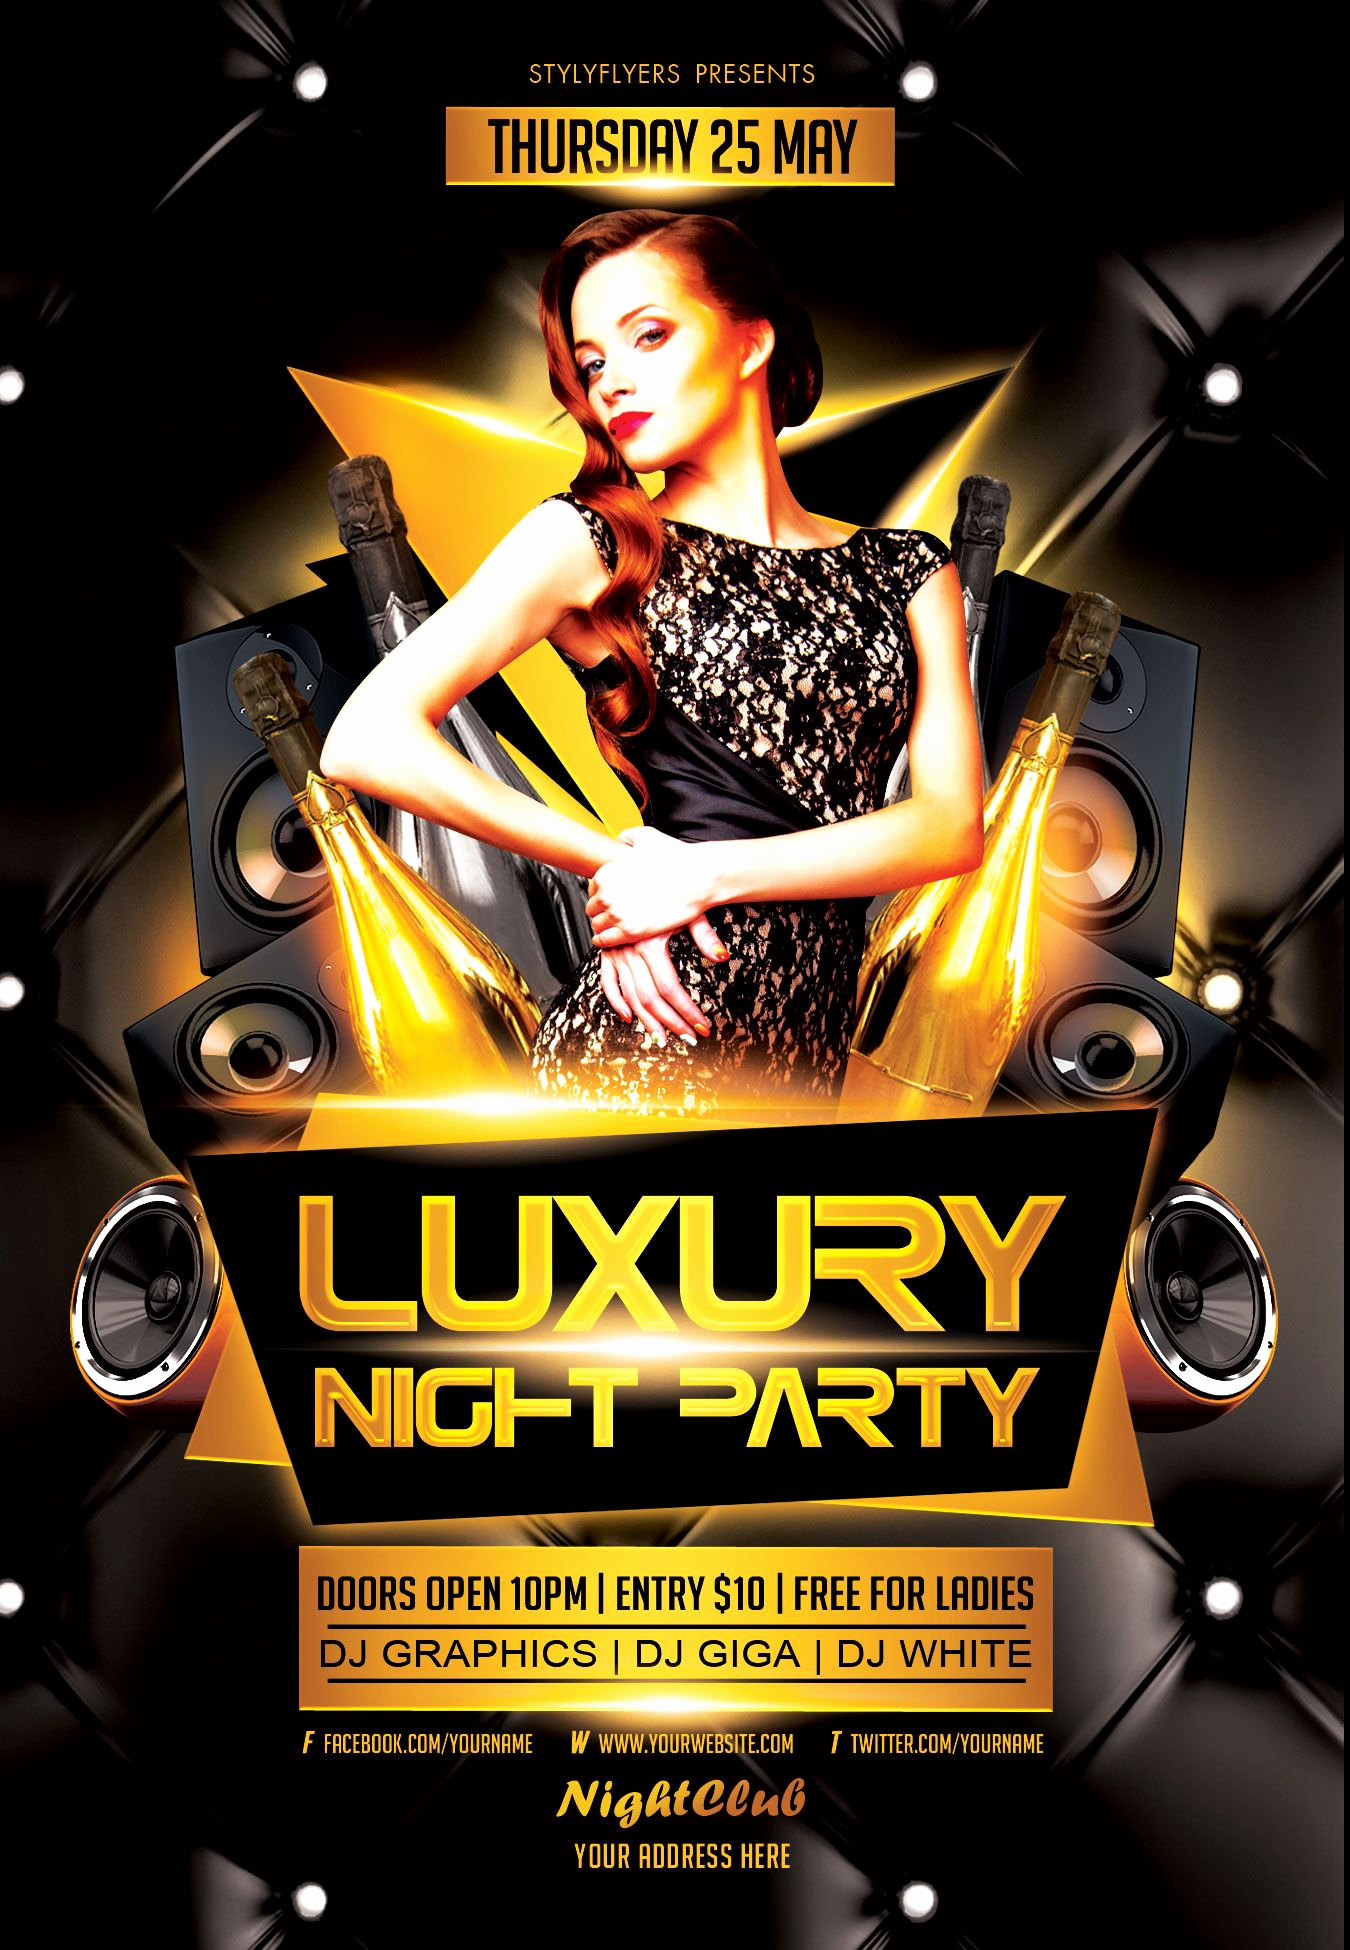 Club Flyer Templates Free Elegant Free Luxury Night Party Flyer Psd Template by Styleflyer